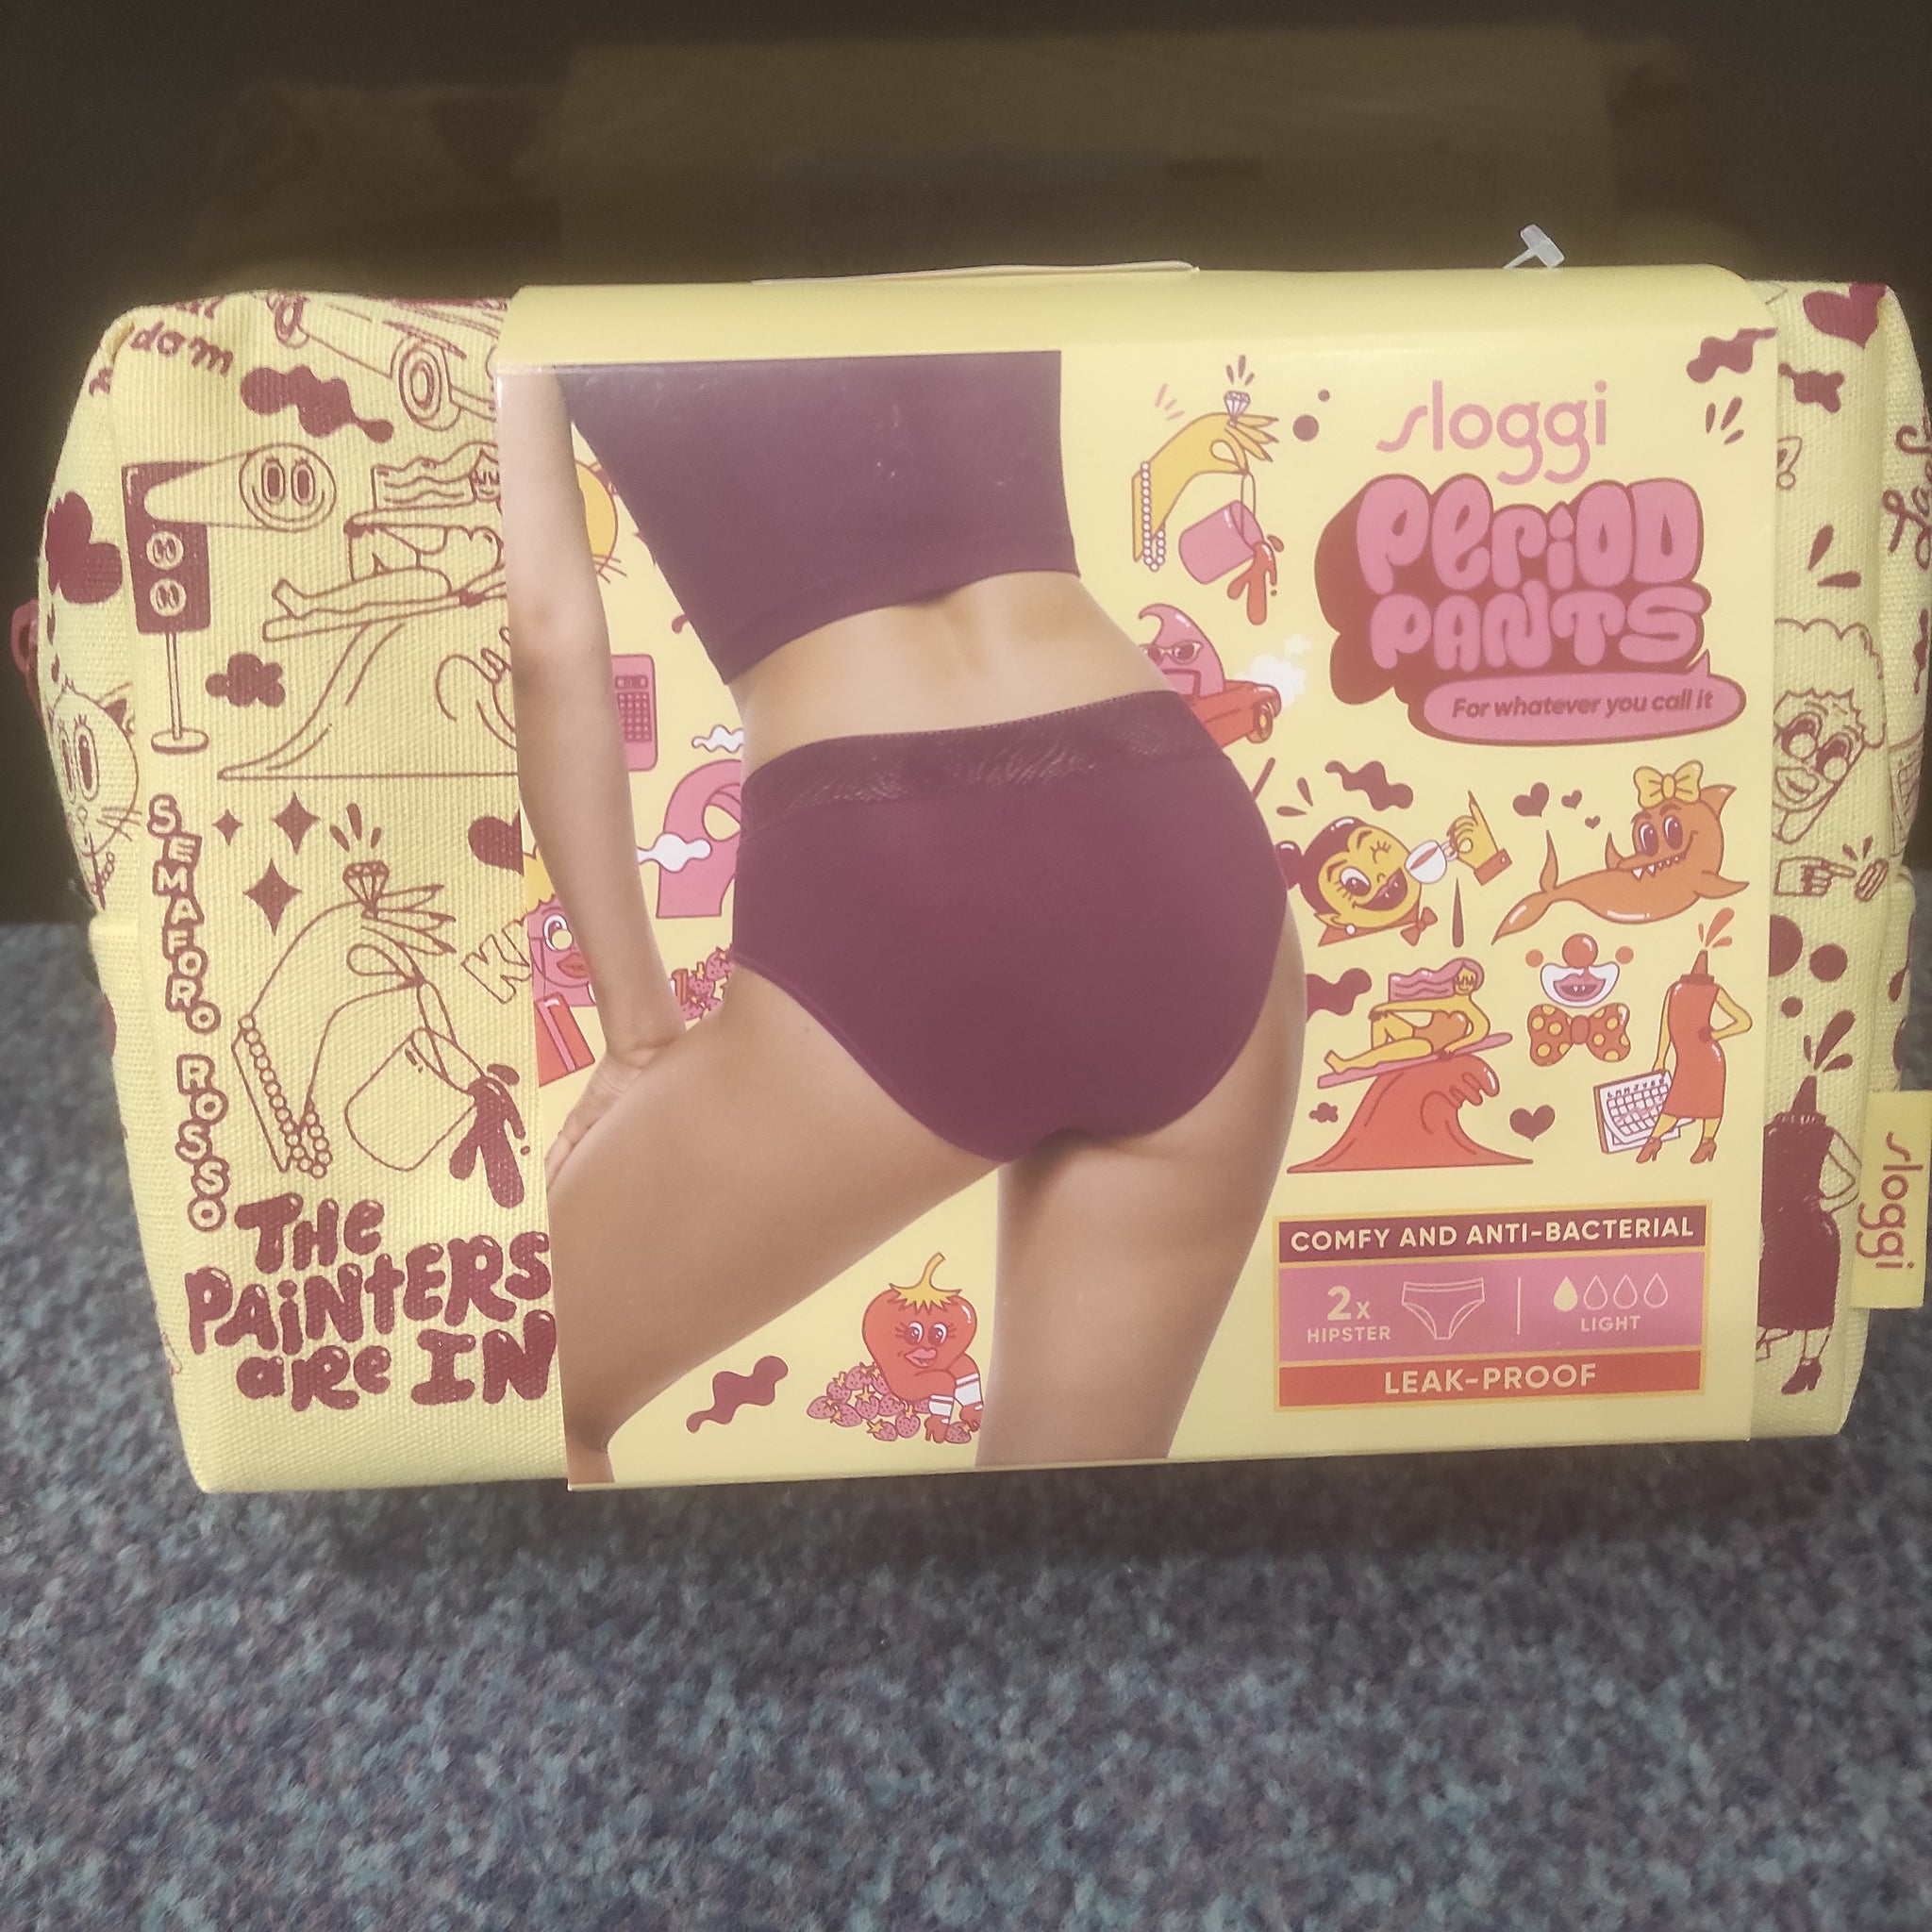 sloggi Light Absorbency Hipster Period Knickers, Pack of 2, Wine